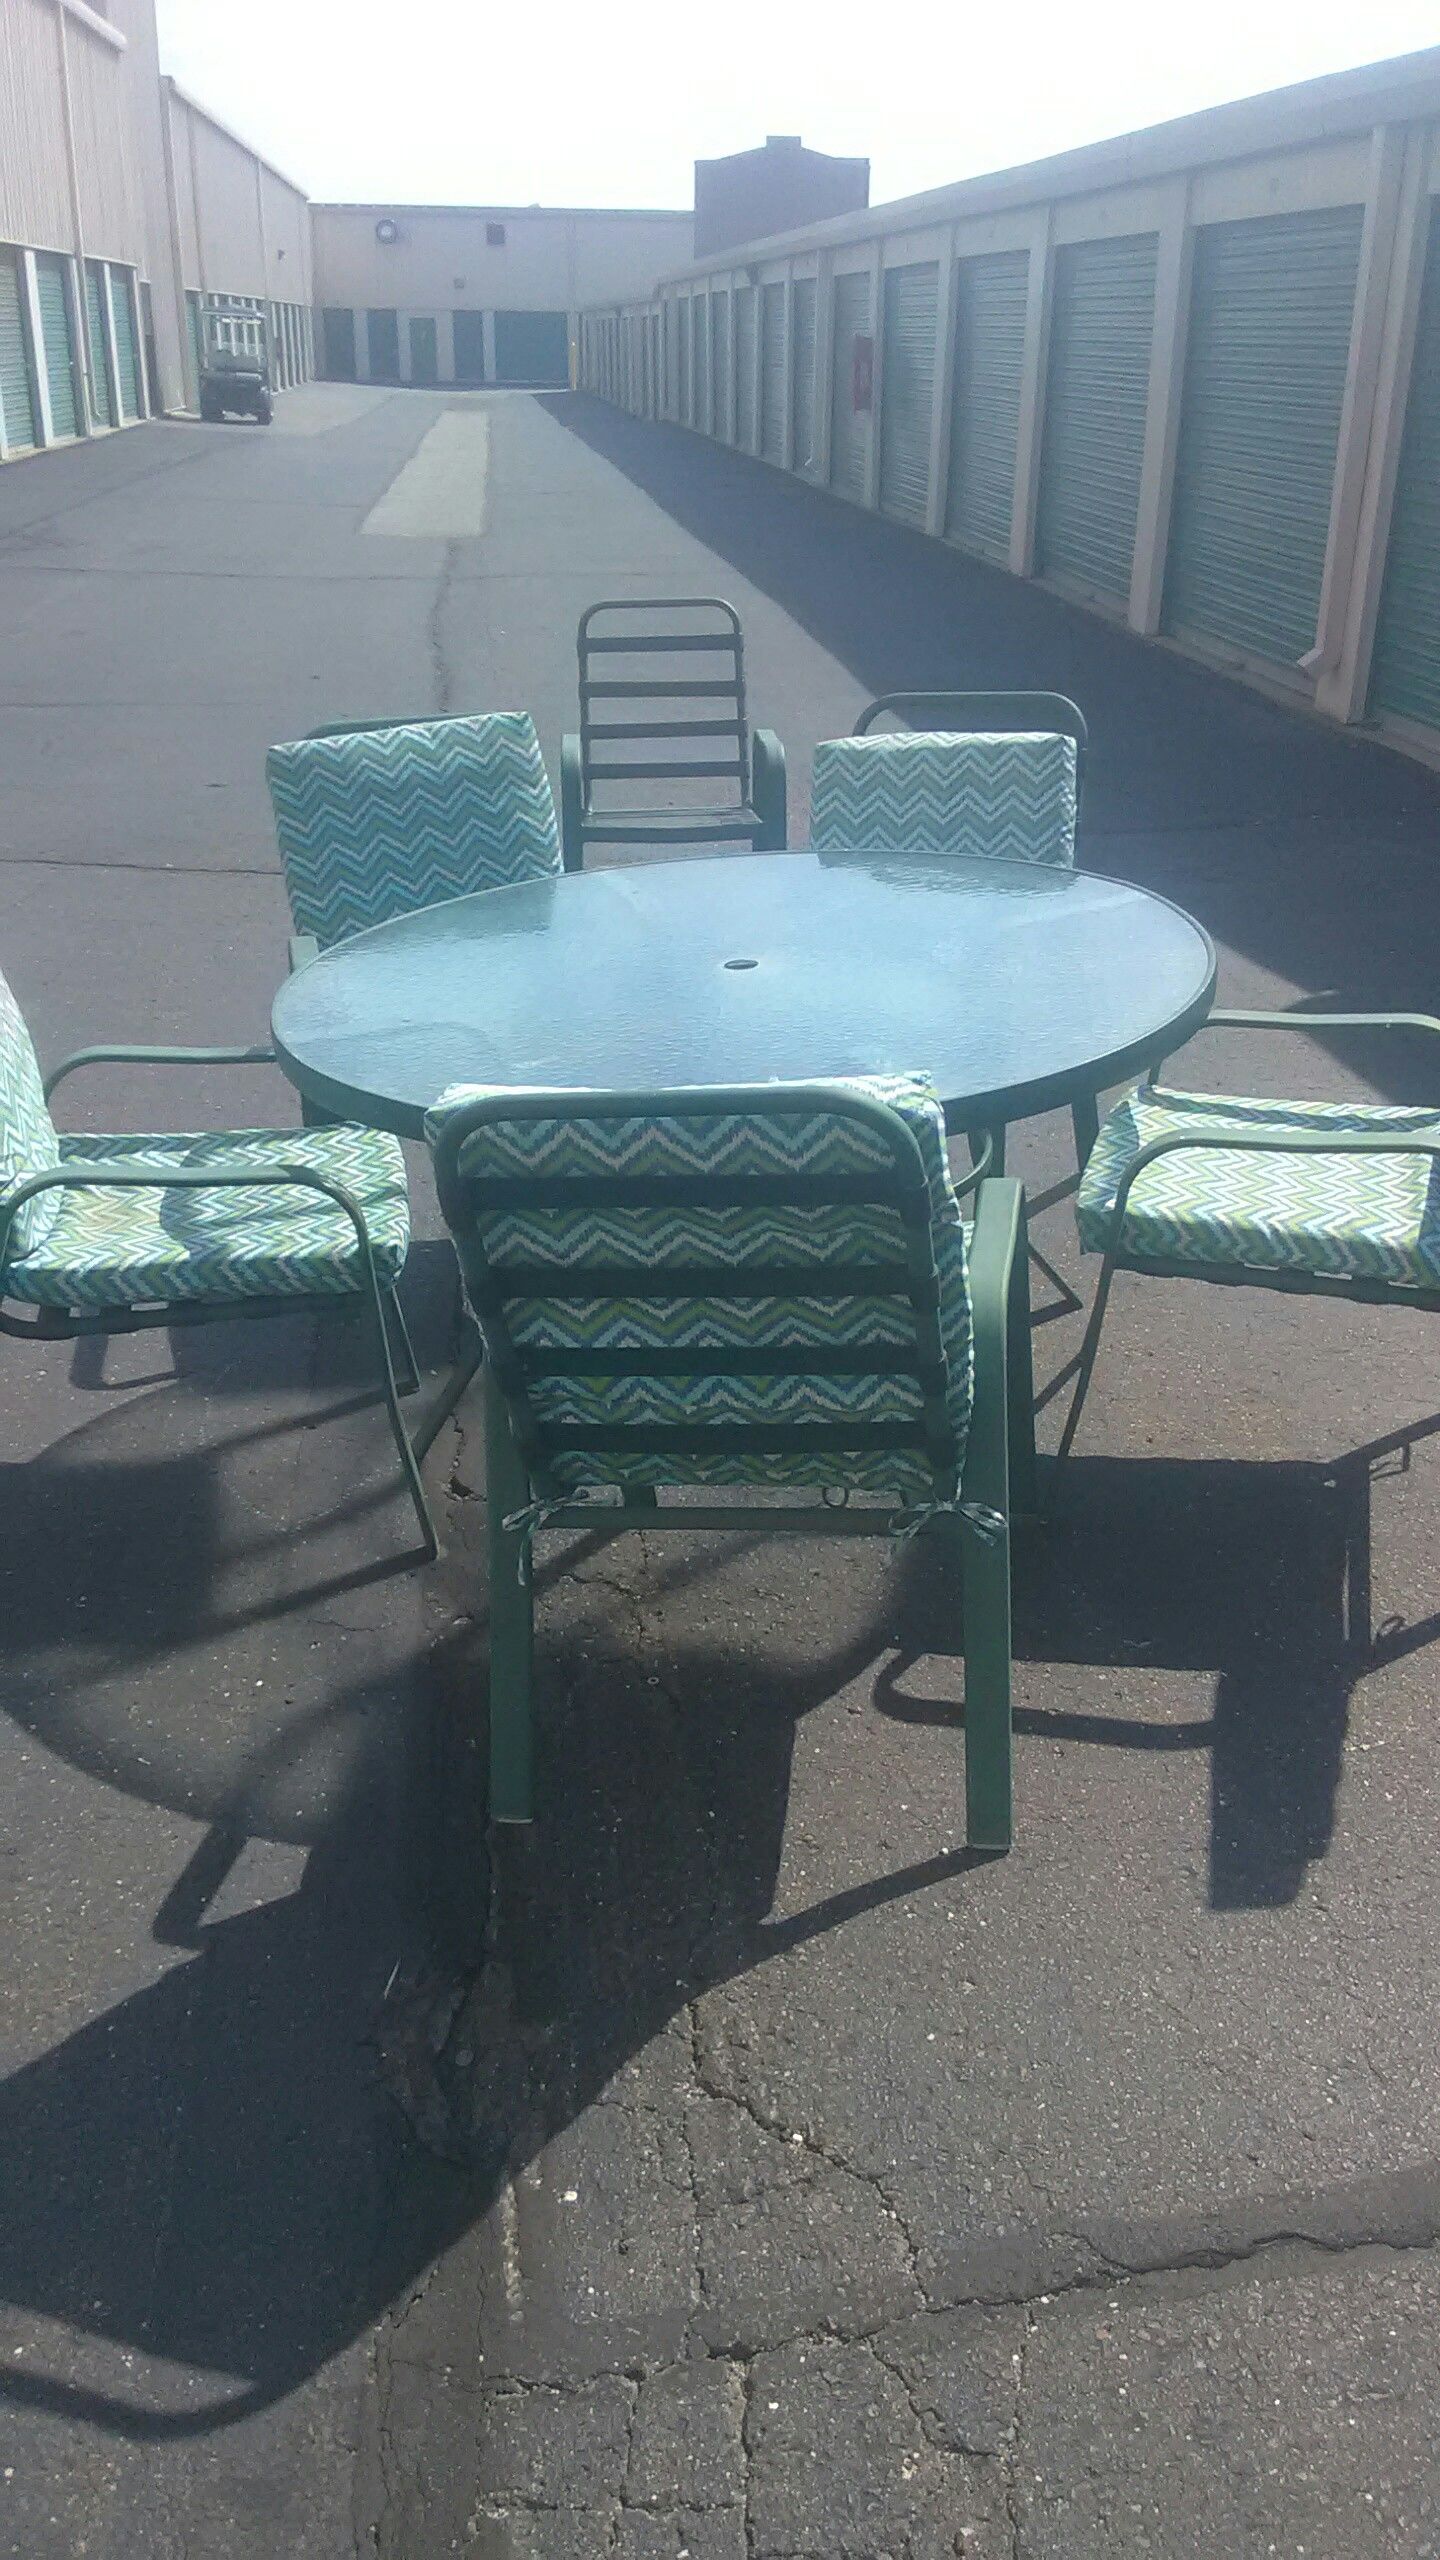 GREAT CONDITION INDOOR OUTDOOR PATIO SET 7 PIECE FOR ALL OCCASIONS CLEAN STURDY STACKABLE CHAIRS DELIVERY IS POSSIBLE TODAY